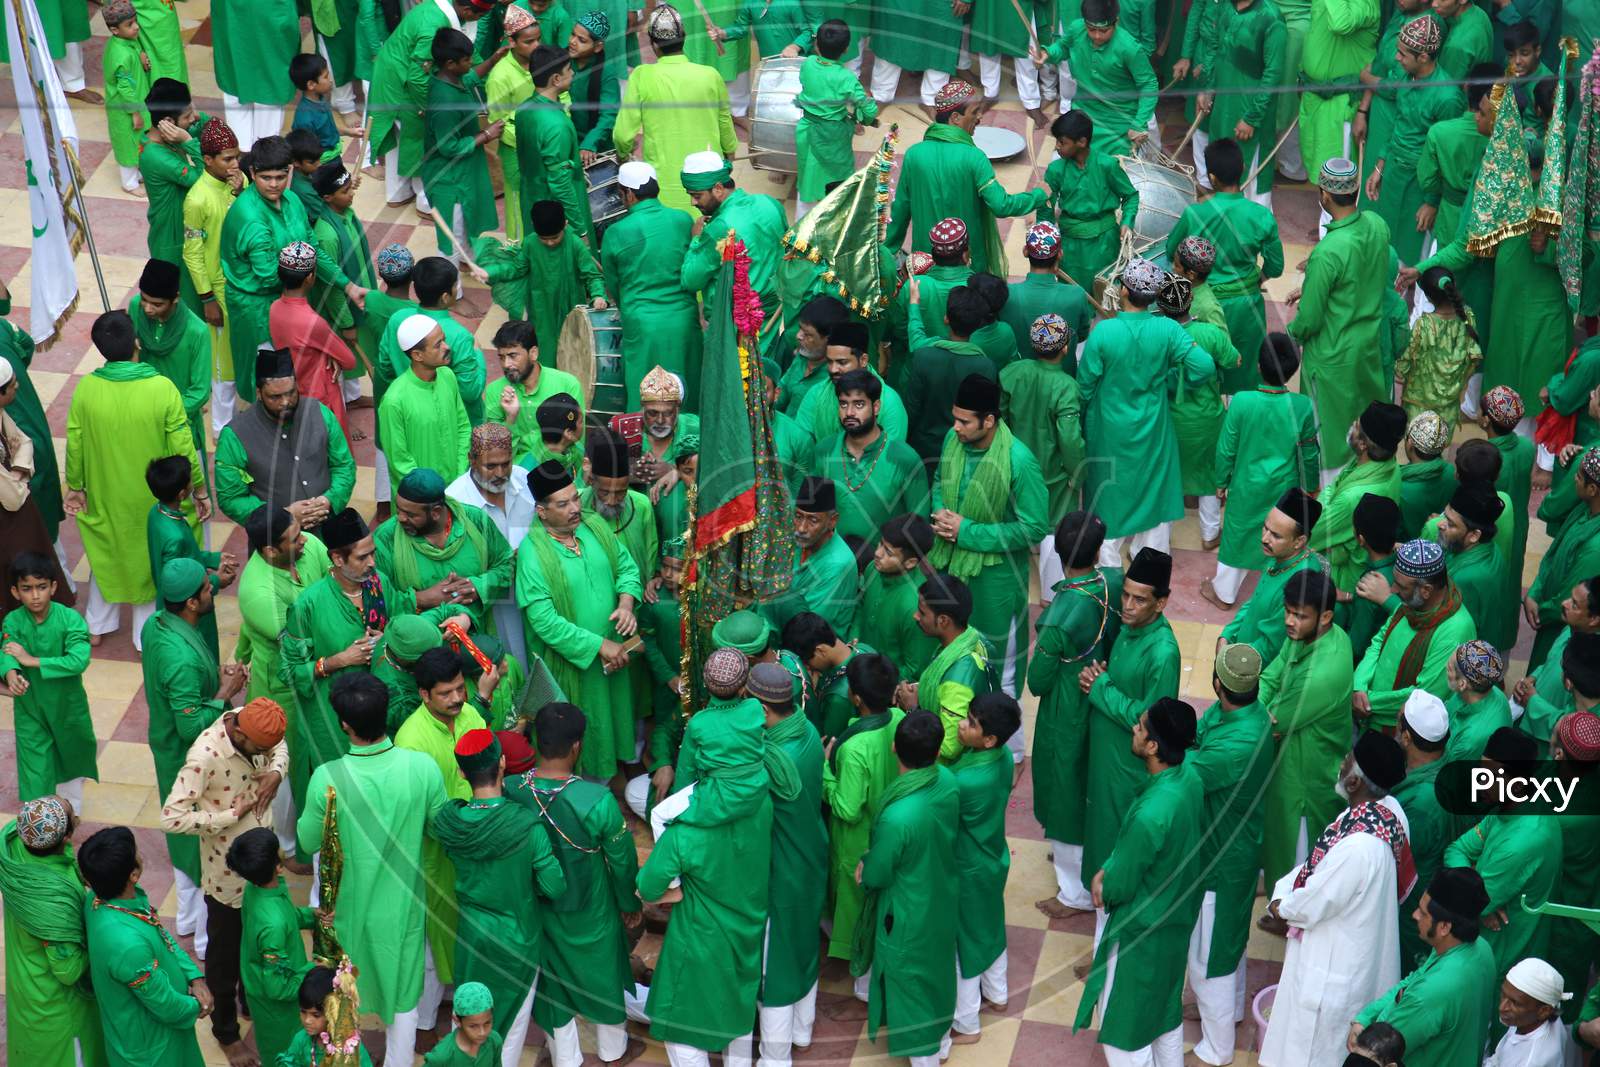 Indian Muslims participate in a procession during the sacred Islamic month of Muharram outside the shrine of Sufi saint Khwaja Moinuddin Chishti in Ajmer, Rajasthan, India.